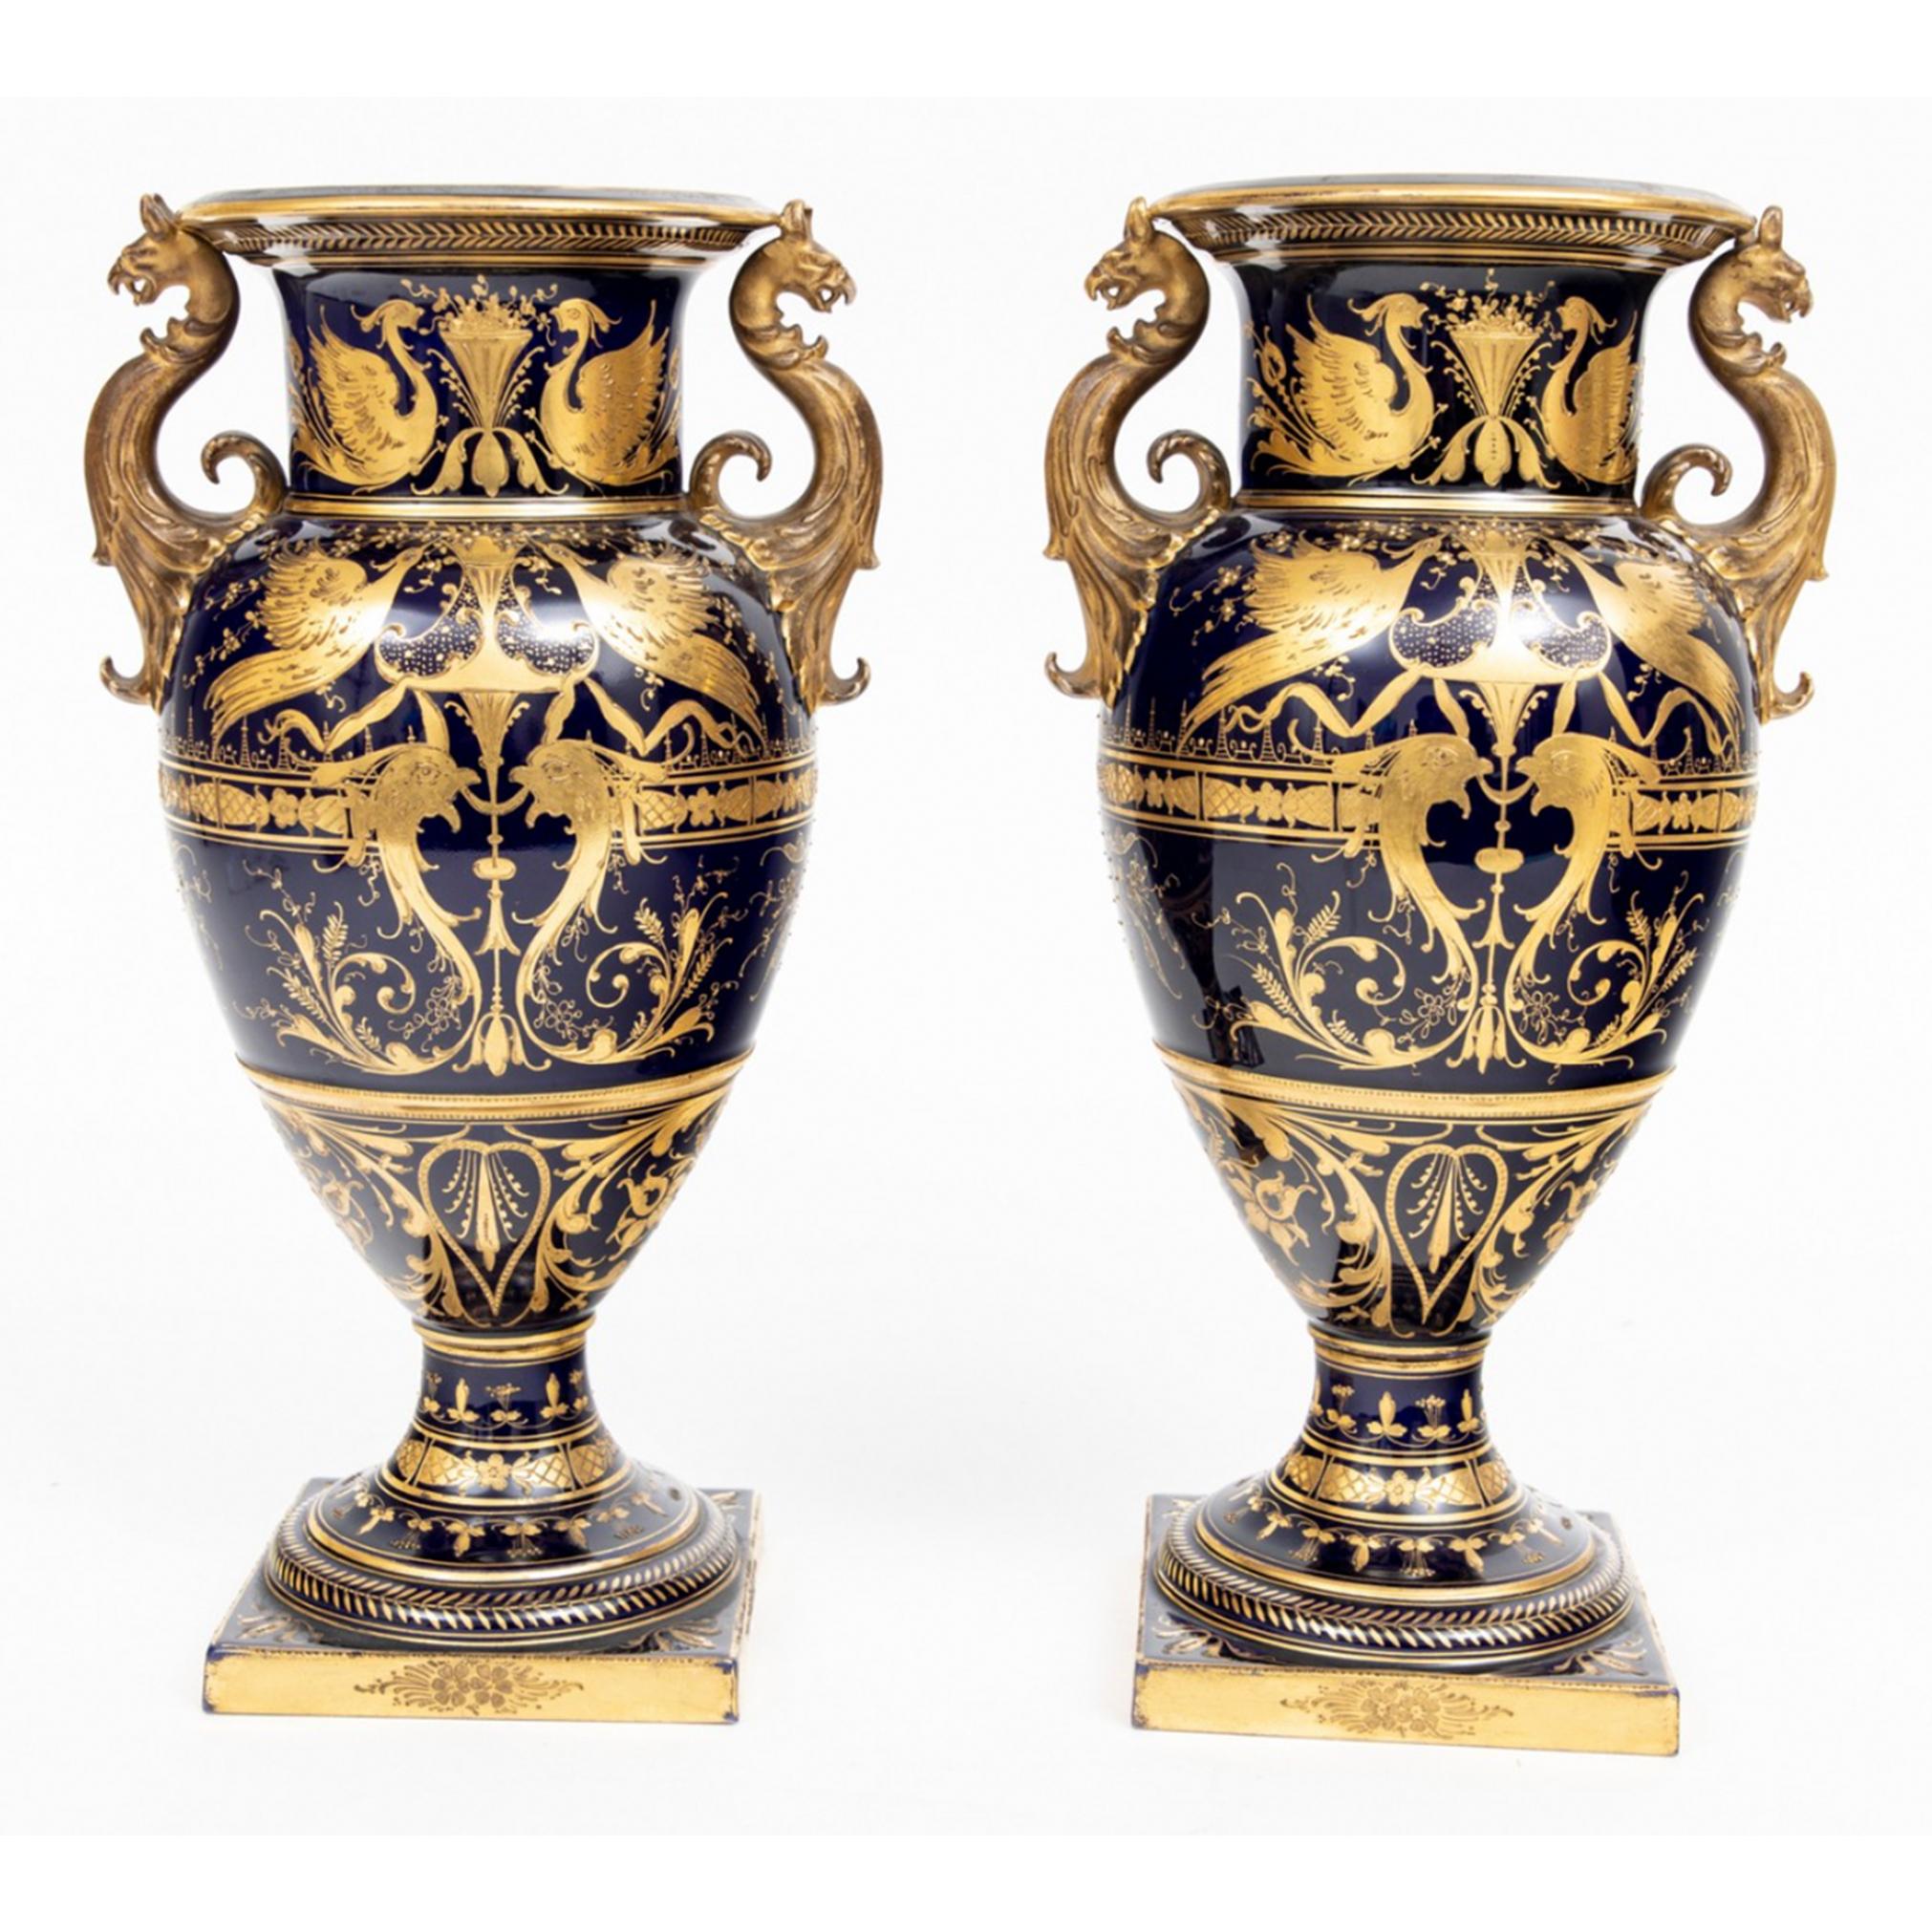 A pair of fine hand painted Royal Vienna handled urns. 
Both urns with beauties within an oval cameo on front and signed by the artist appearing to be T. Becker and A. Becker.

 The urns are lavishly decorated with relief gold decorations with